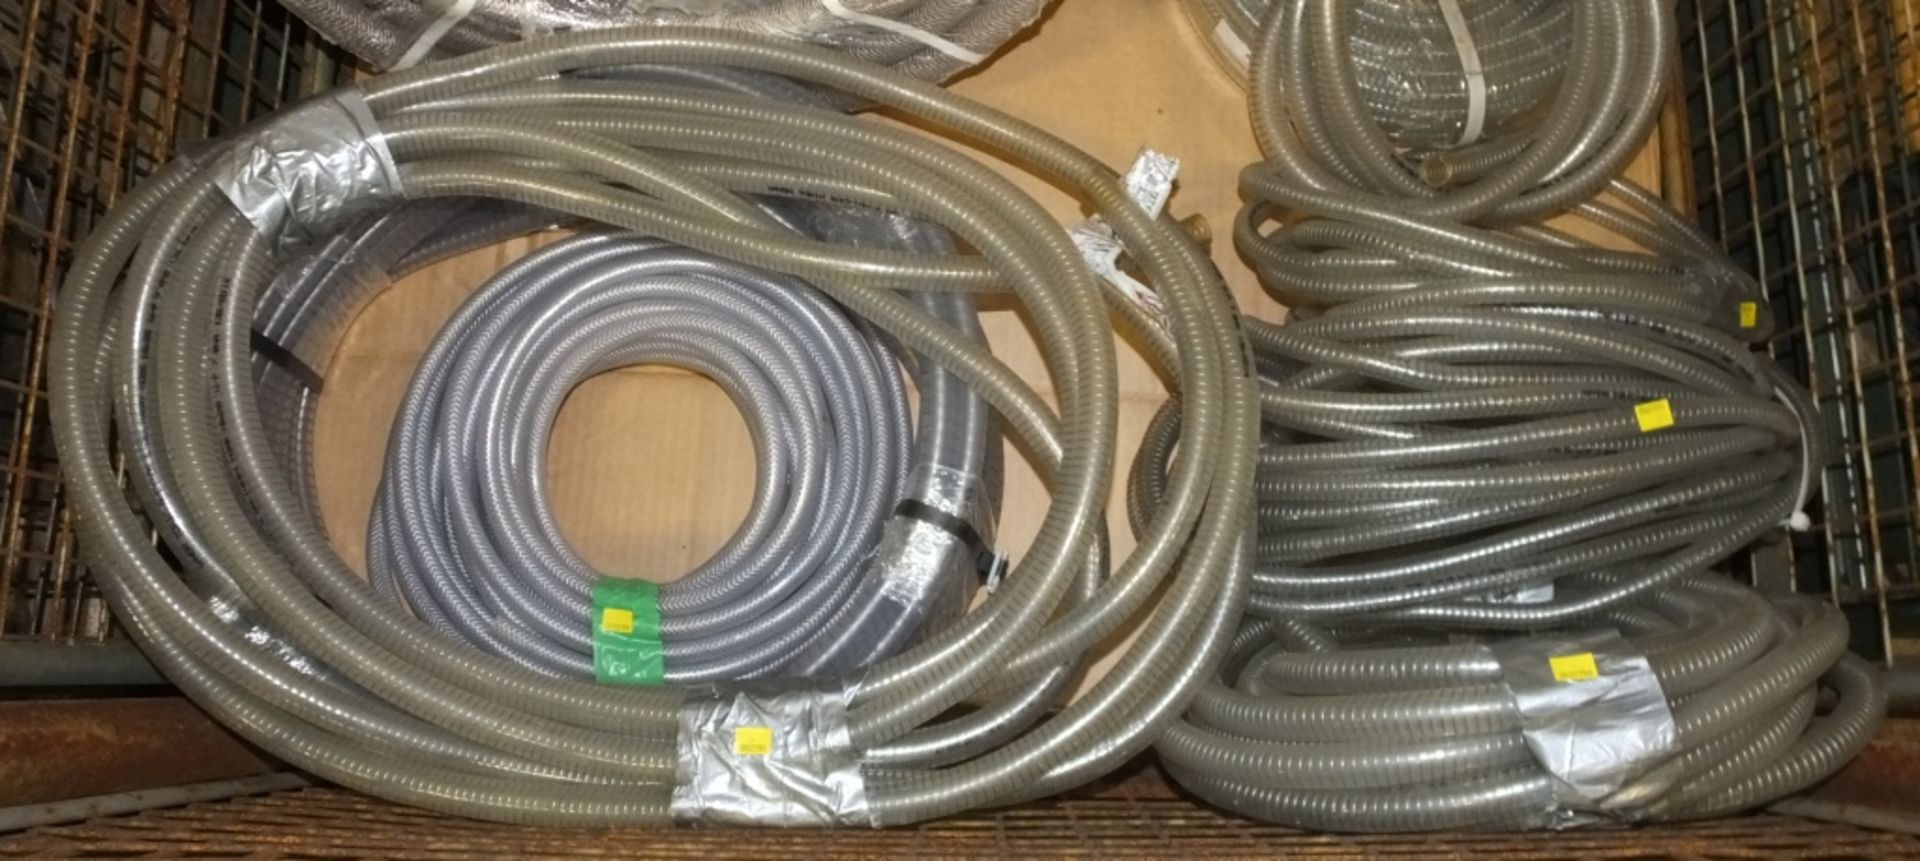 10x Clear Hoses - unknown lengths - Image 4 of 4